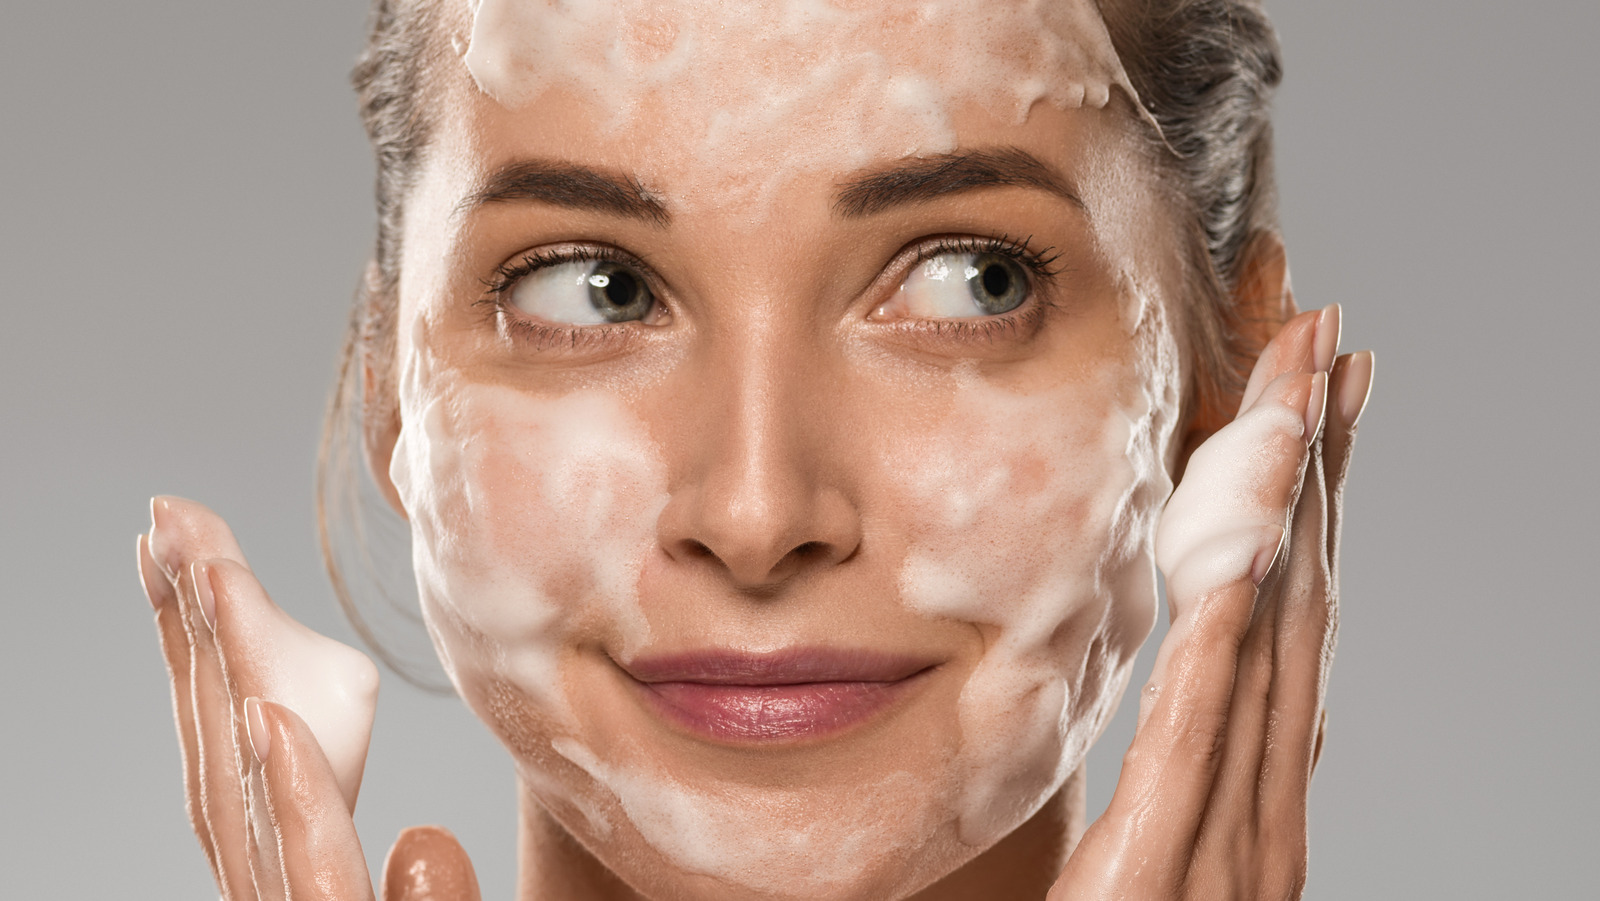 The Ingredients You Don't Want To See In Your Face Wash